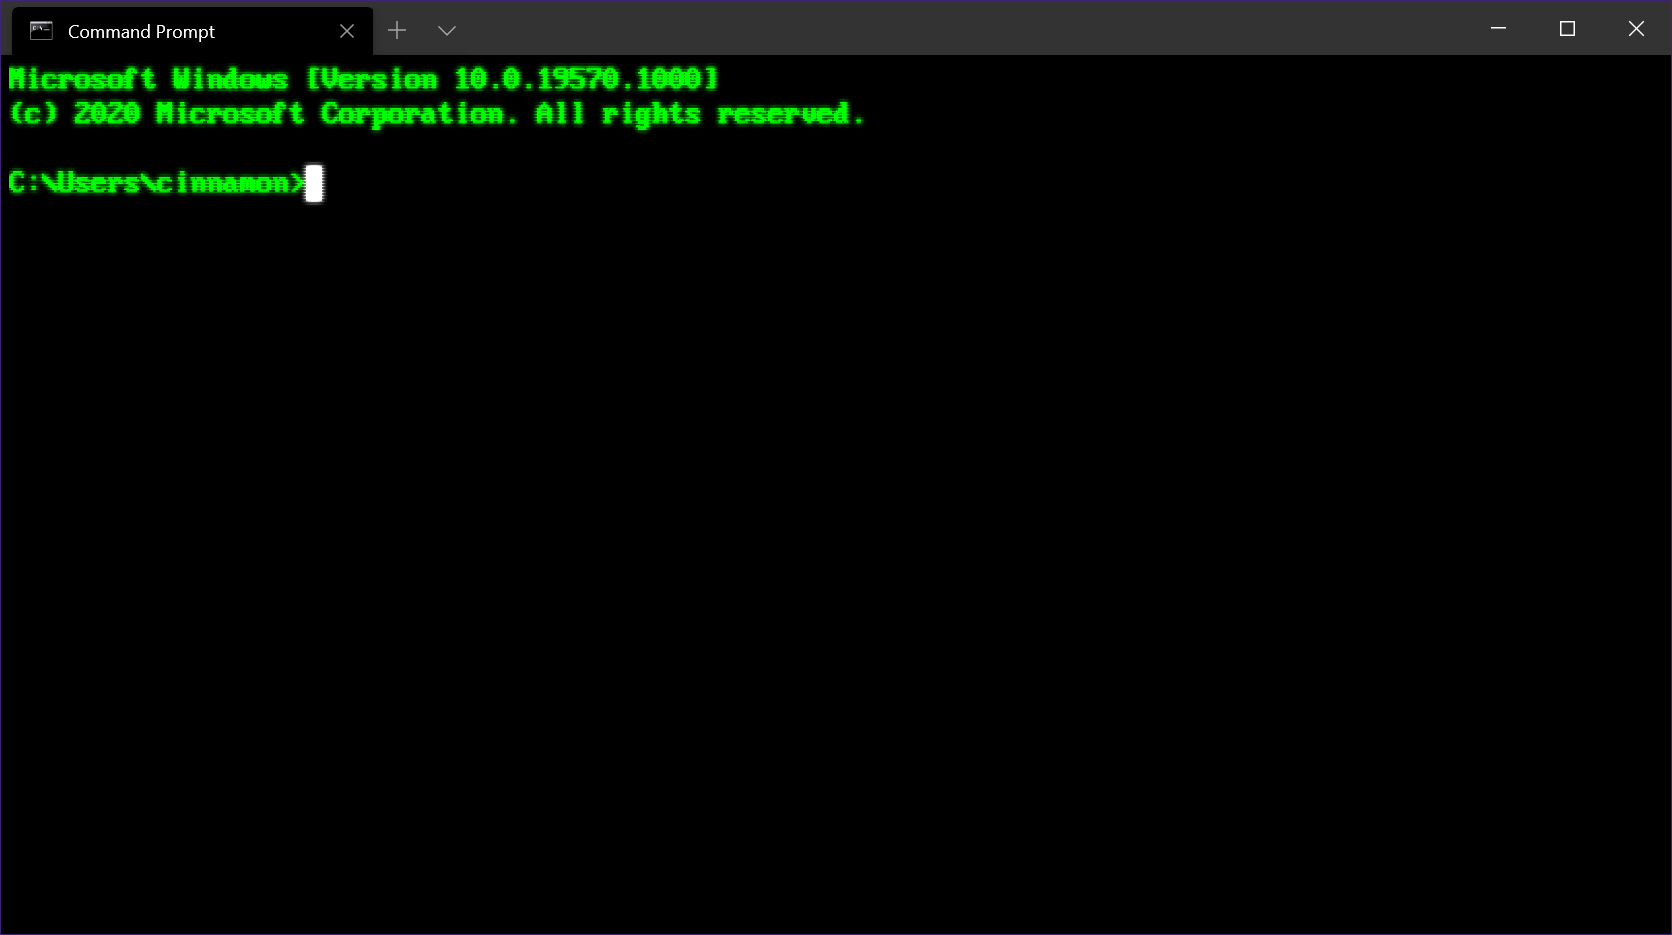 Linux terminal screen with a command prompt.